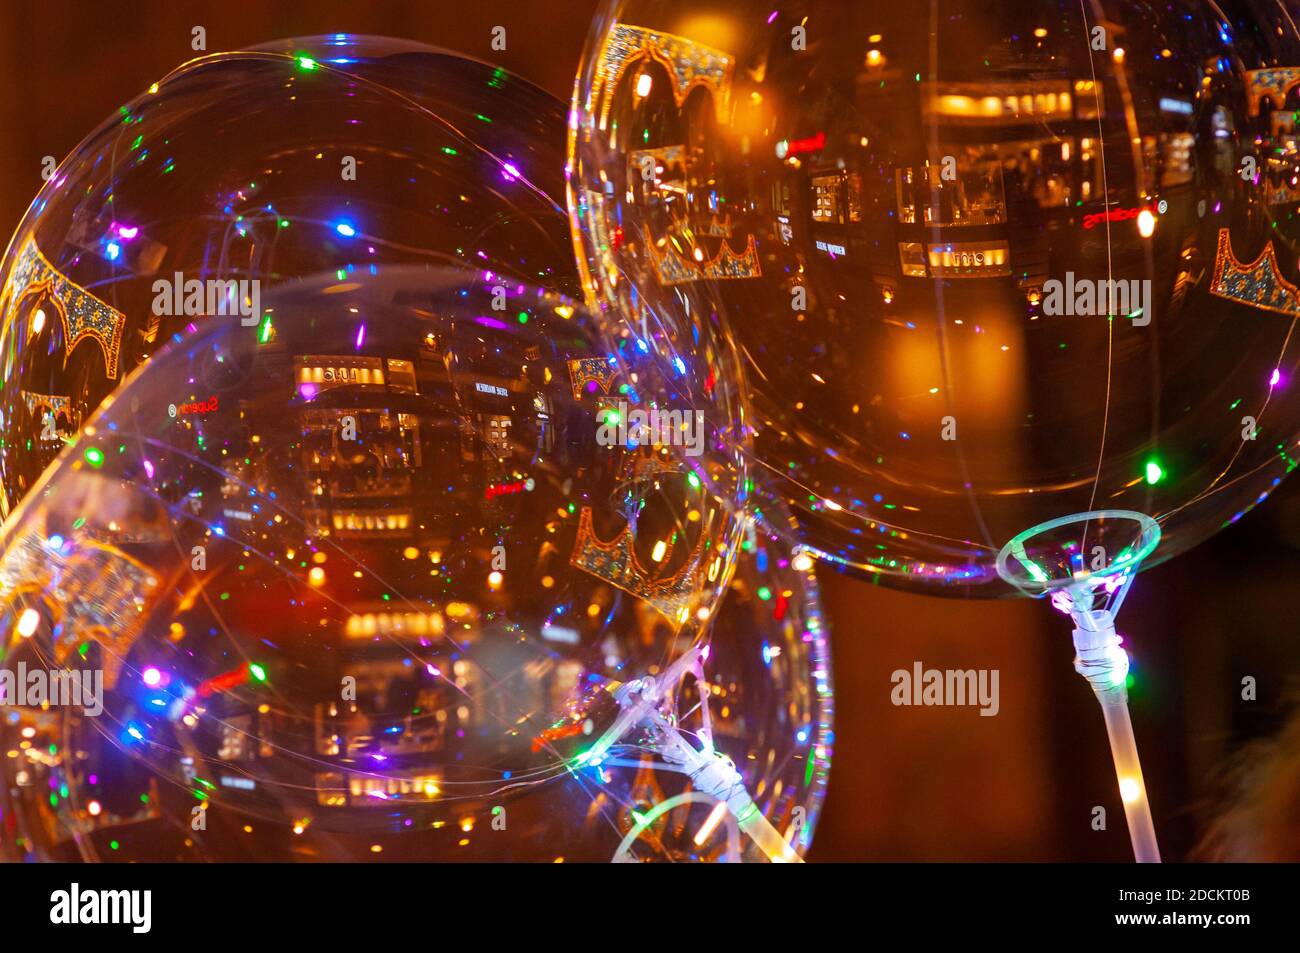 bundle of balls of Christmas lights with dark background Stock Photo